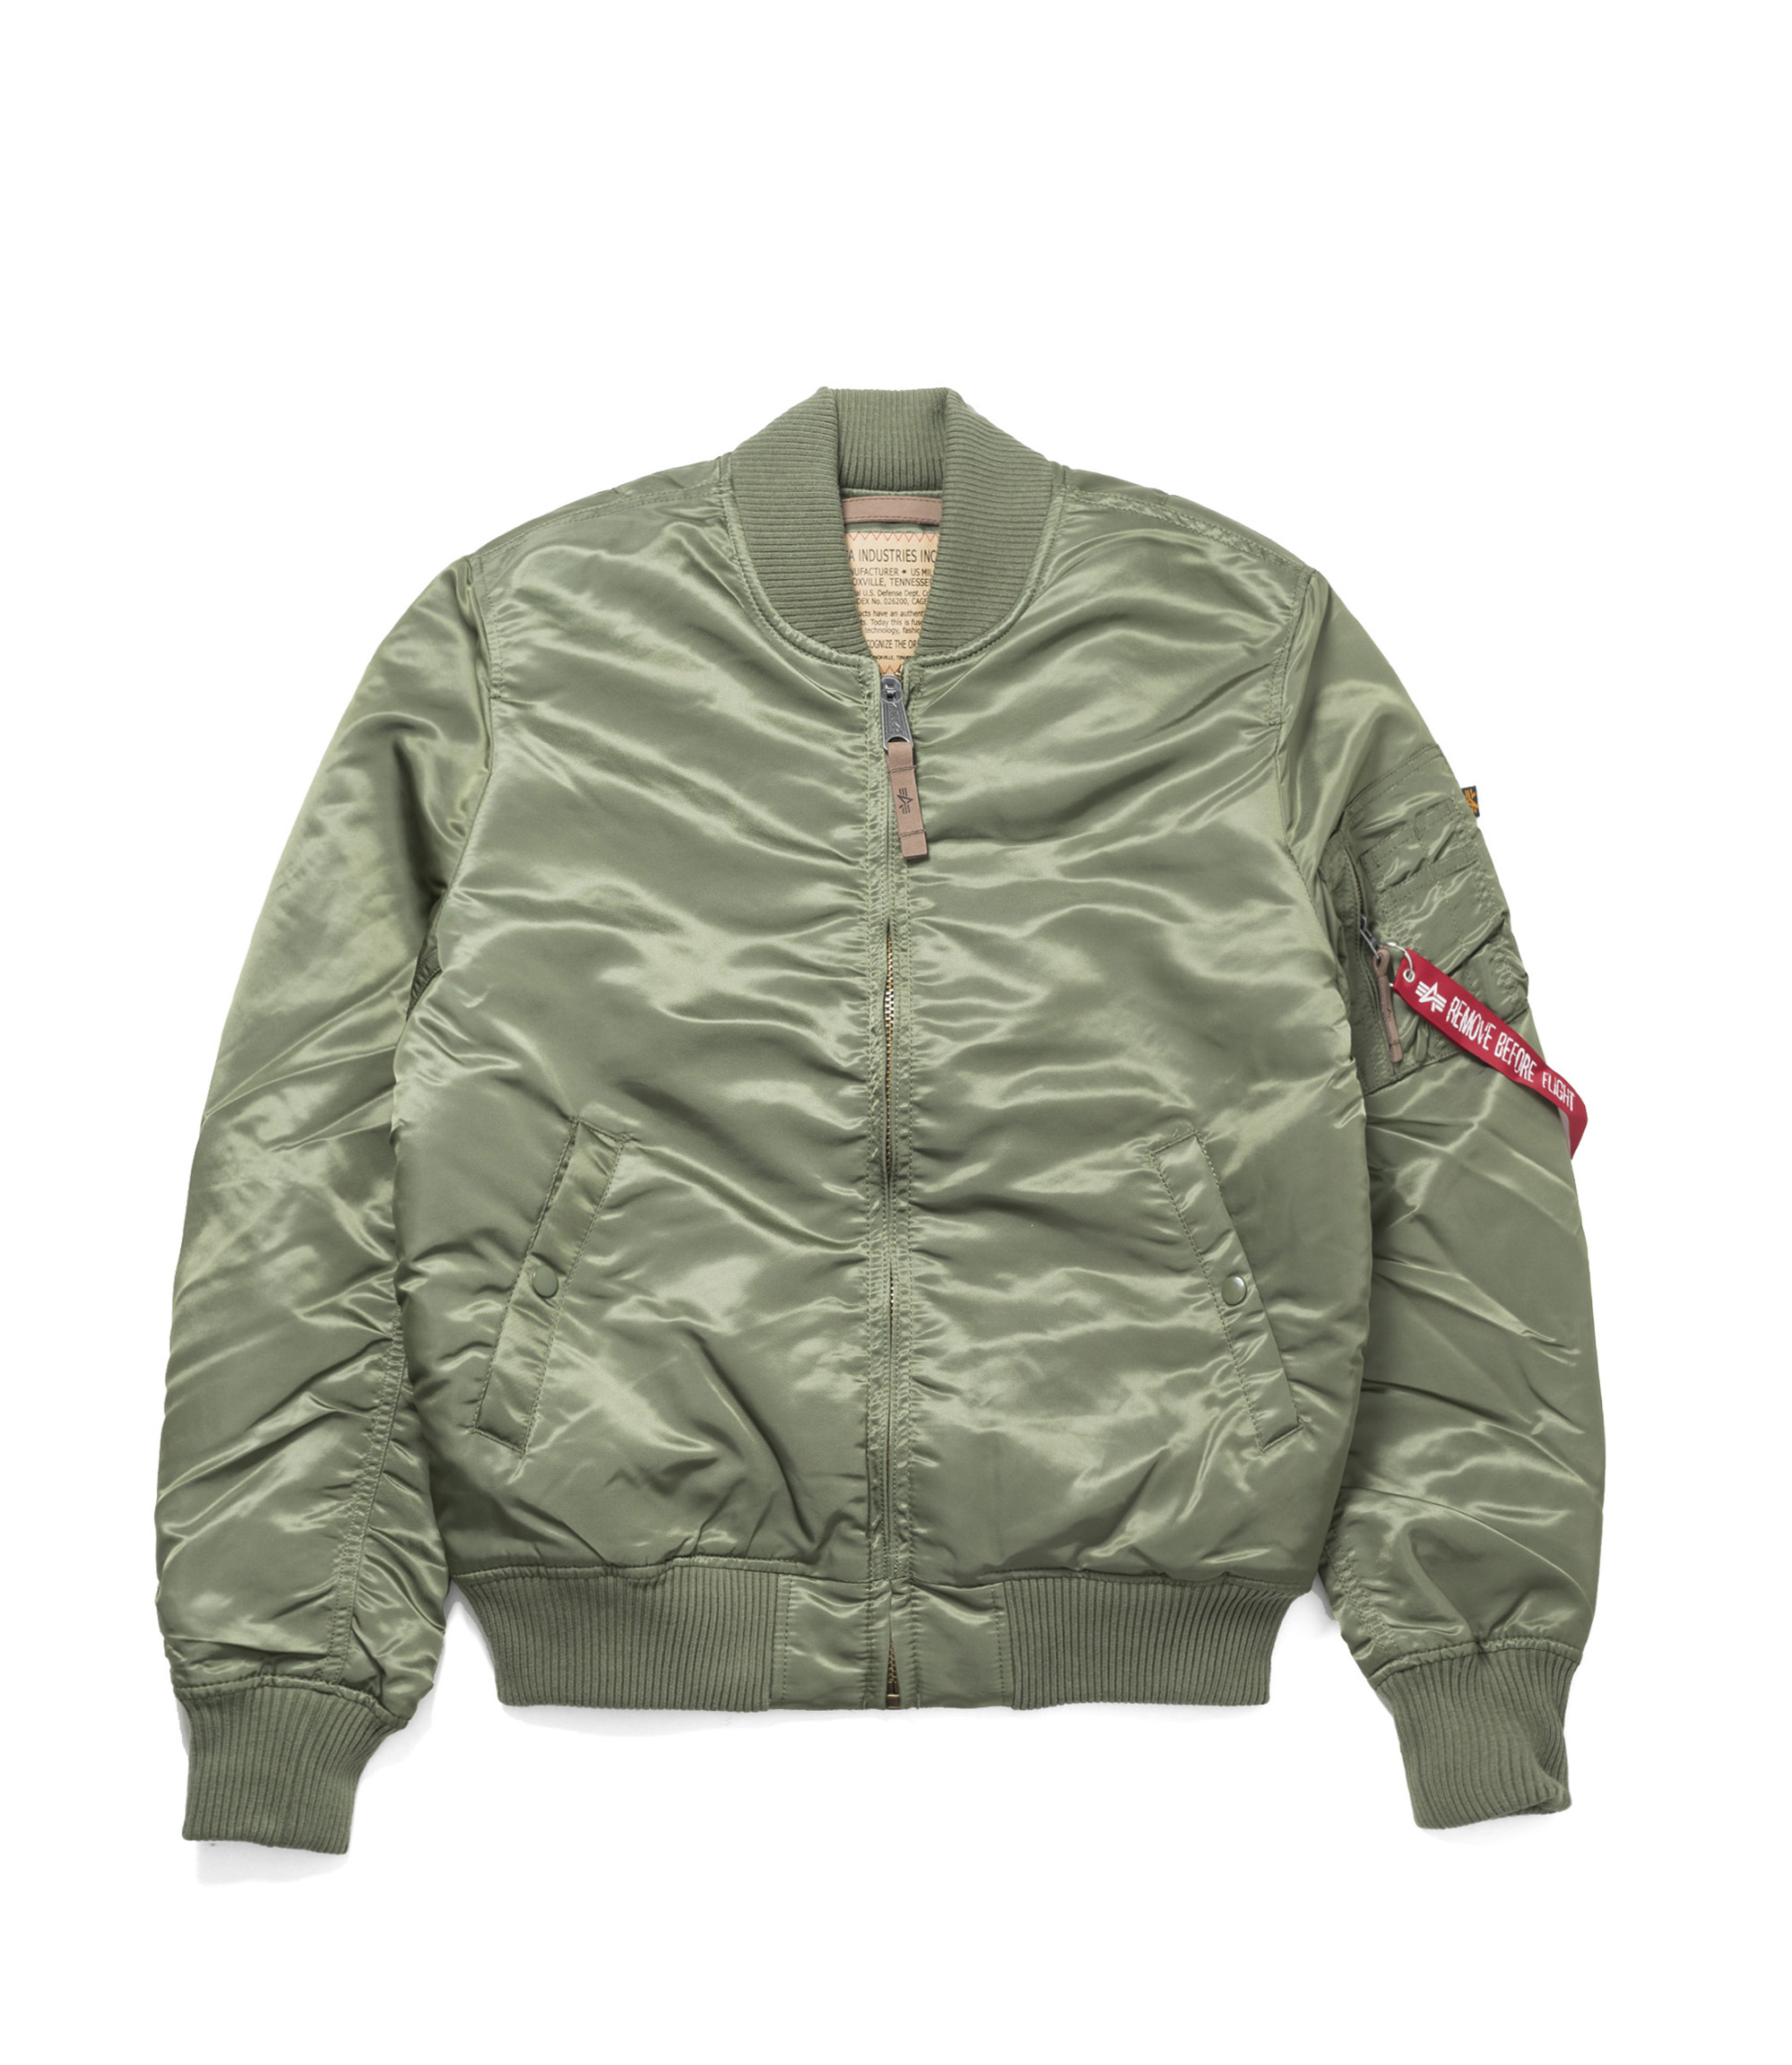 Shop Alpha Industries MA-1 Bomber VF 59 Sage Green at itk online store